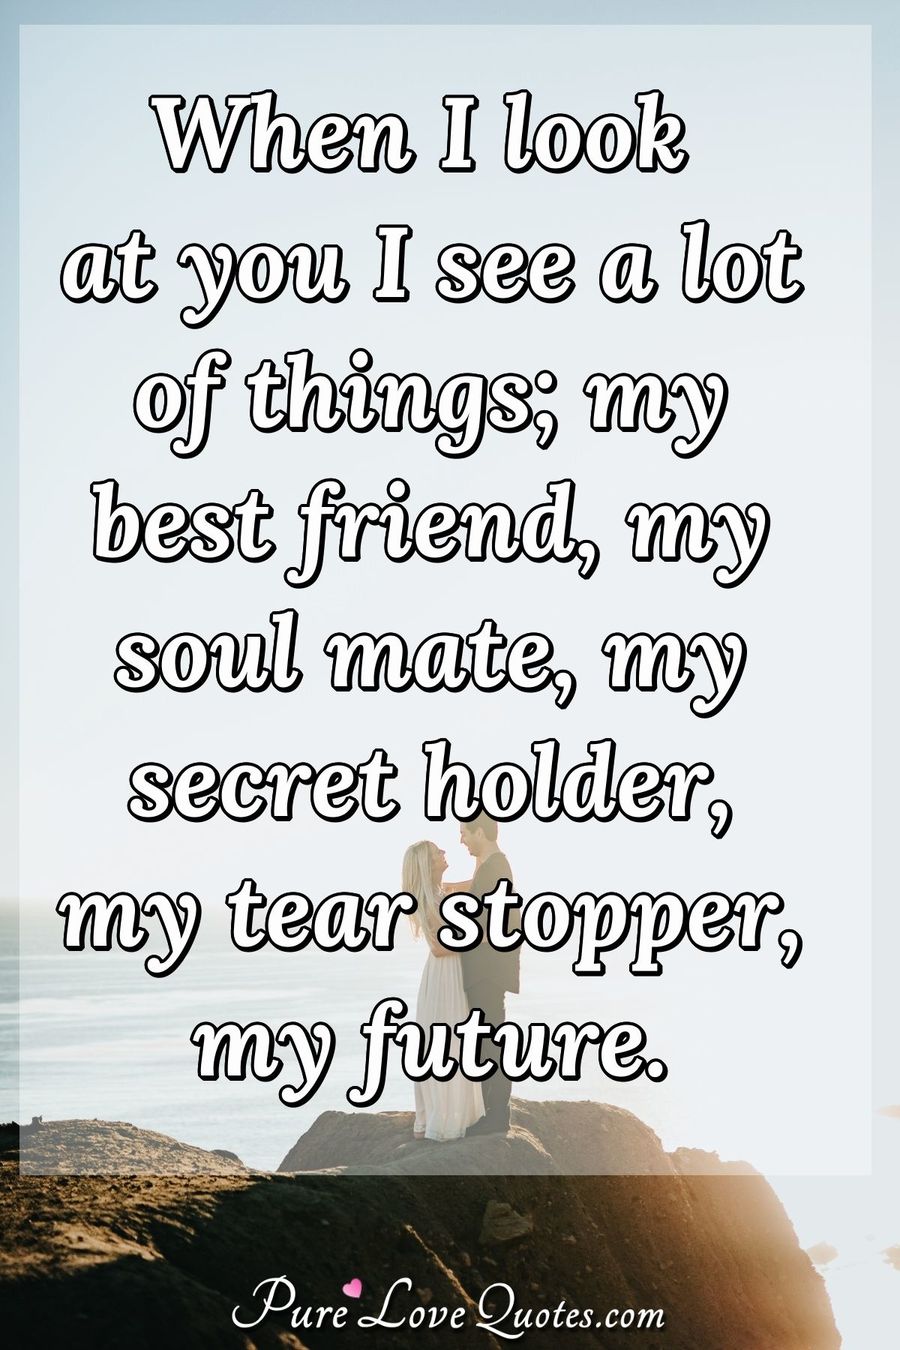 Pure Love Quotes On Twitter: "When I Look At You I See A Lot Of Things; My Best Friend, My Soul Mate, My Secret Holder, My Tear Stopper, My Future. #Future #Loveyou #